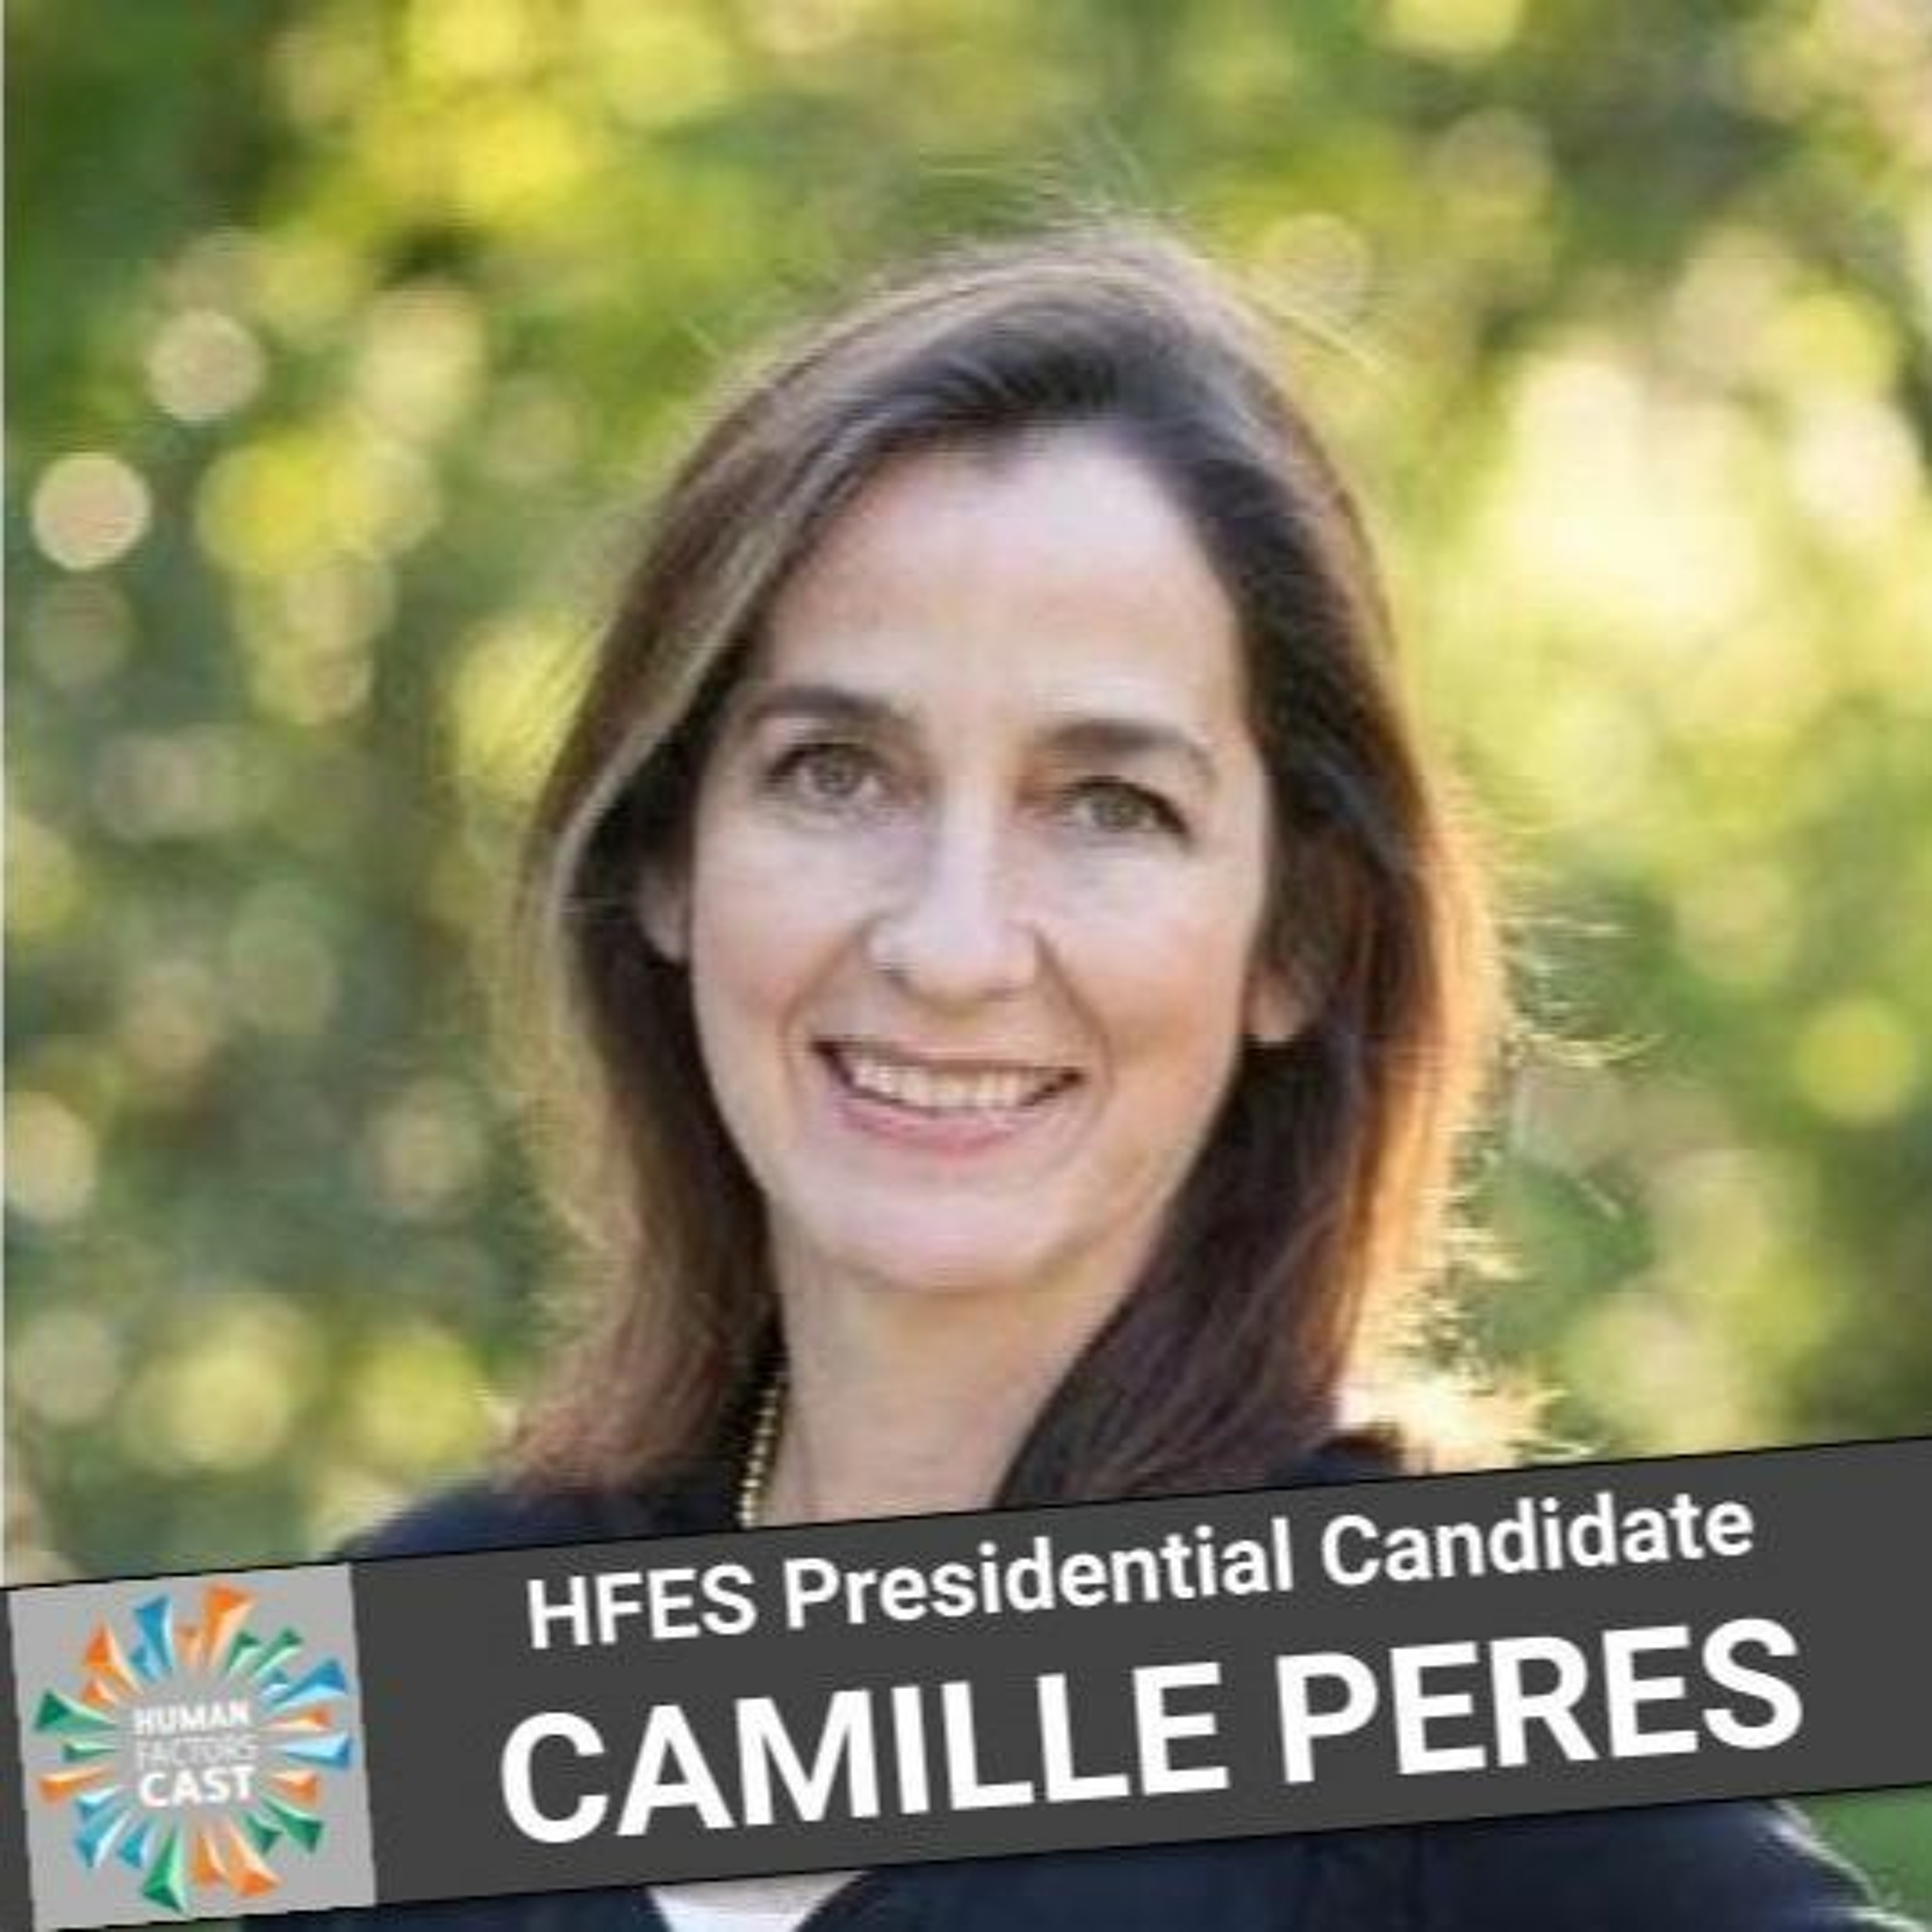 HFES Presidential Candidate Bonus Episode - Camille Peres Image